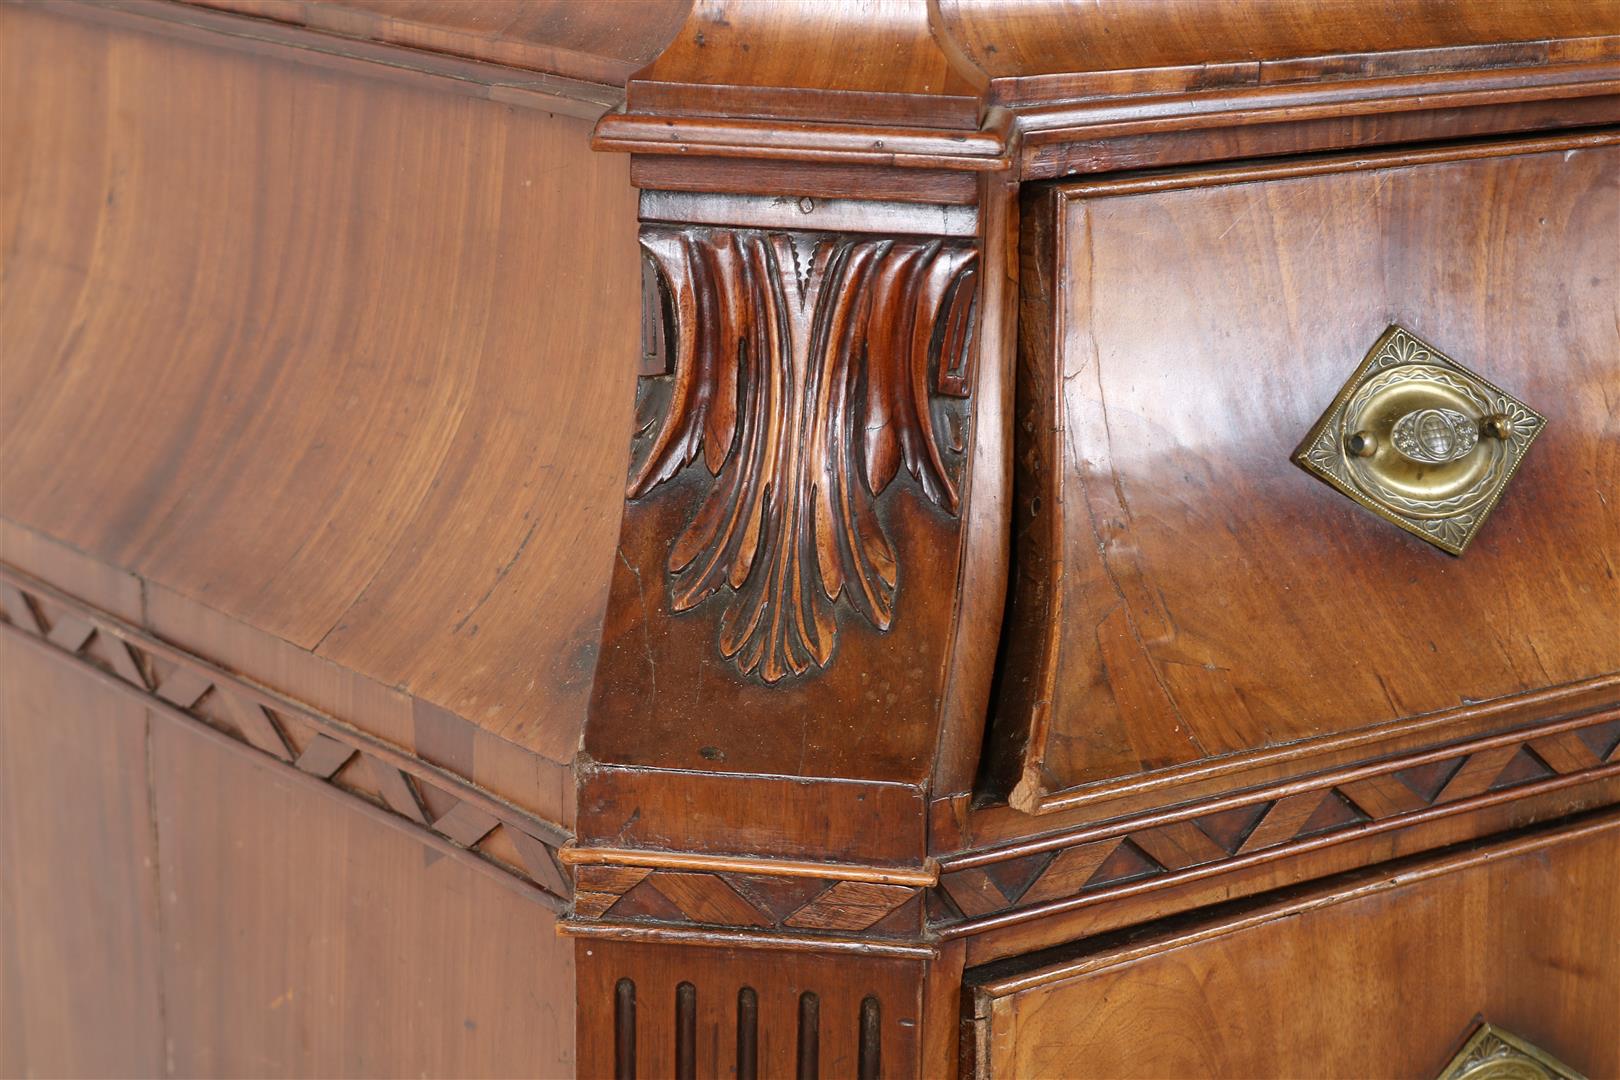 Mahogany Louis XVI breakfront cabinet with carved garlands in crest, 2 panel doors and 3 drawers, - Image 5 of 7